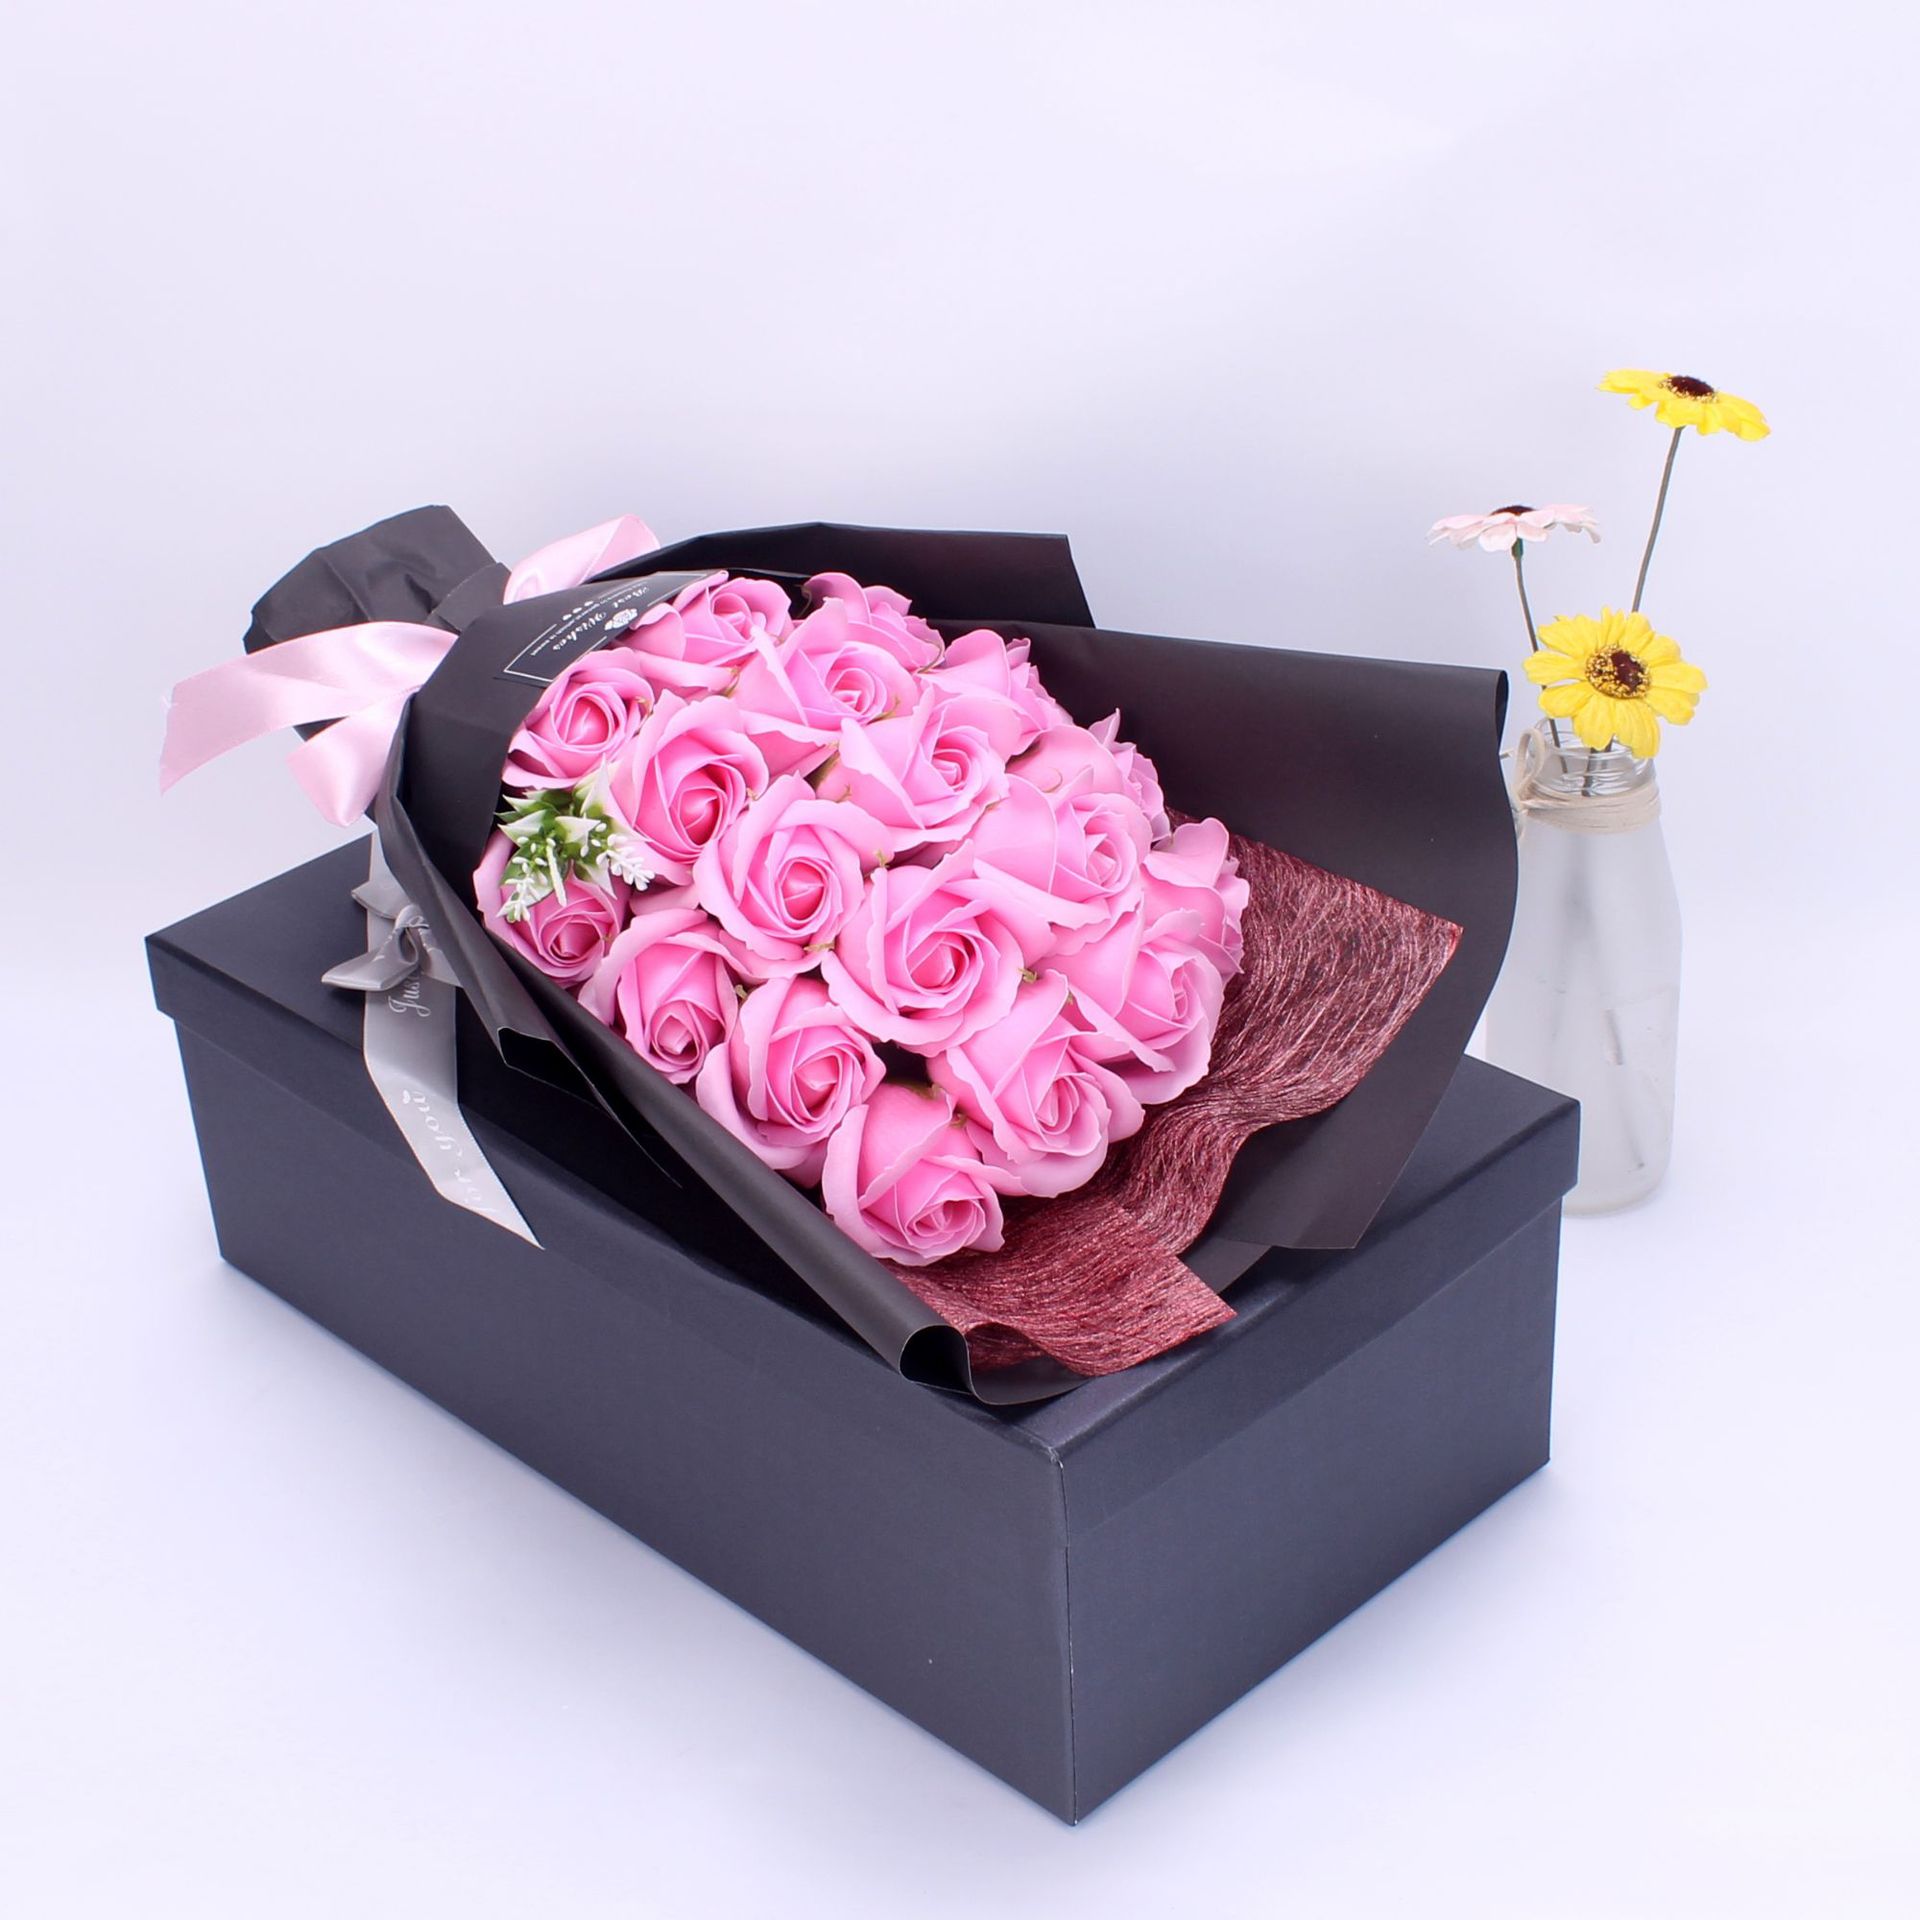 Valentine's Day Creative Gift 18 Soap Rose Bouquet Gift Box Amazon Mother's Day Birthday Gift Soap Flower